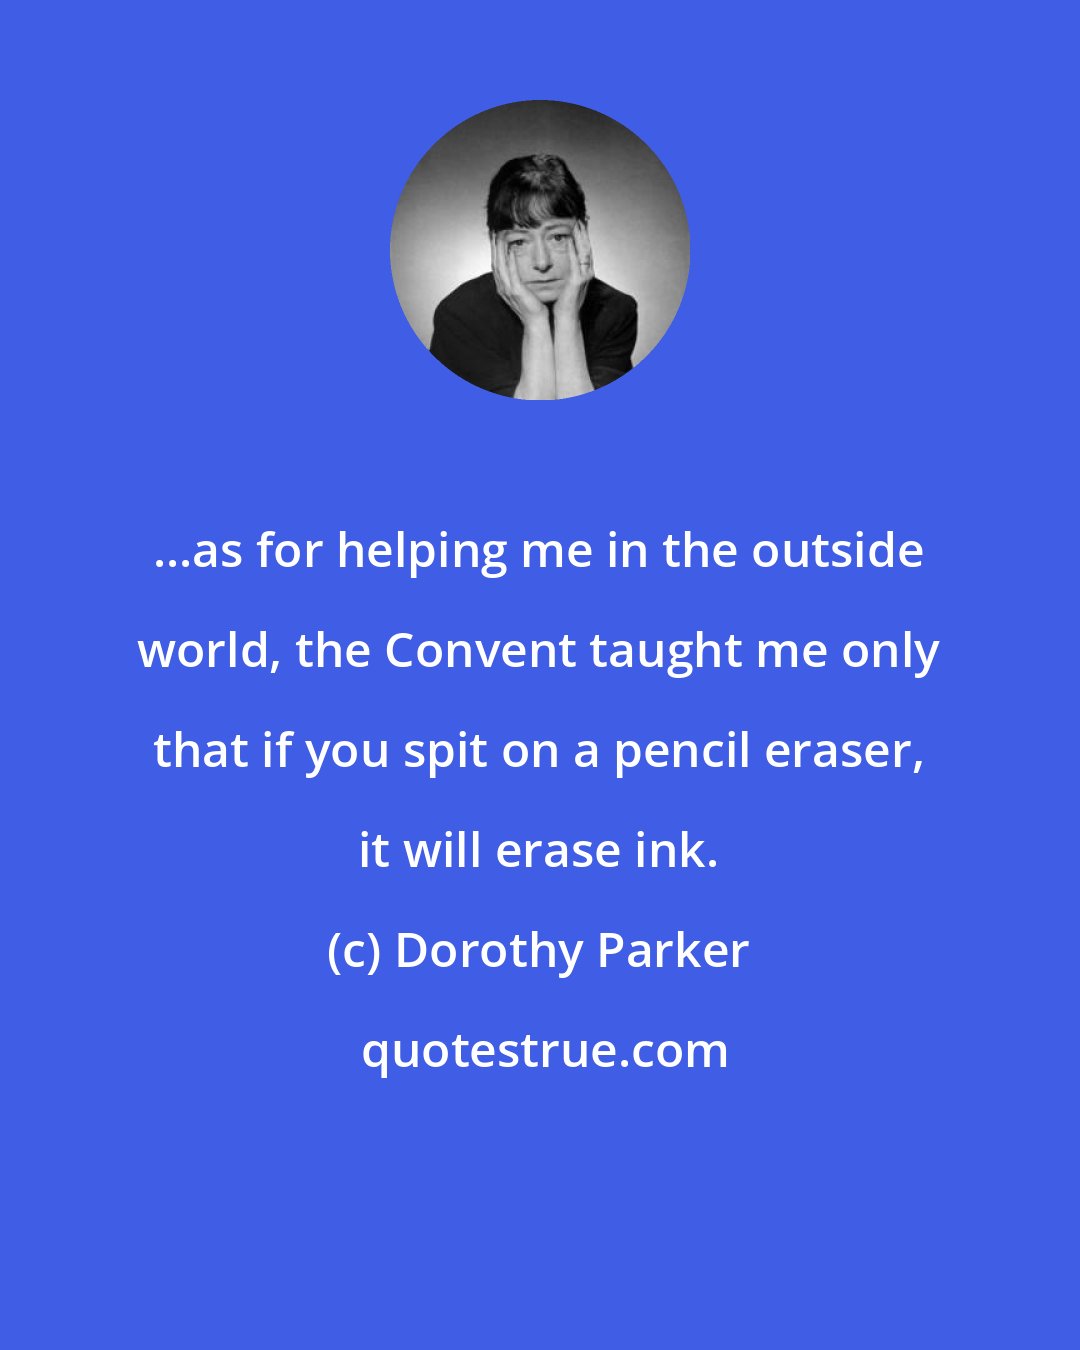 Dorothy Parker: ...as for helping me in the outside world, the Convent taught me only that if you spit on a pencil eraser, it will erase ink.